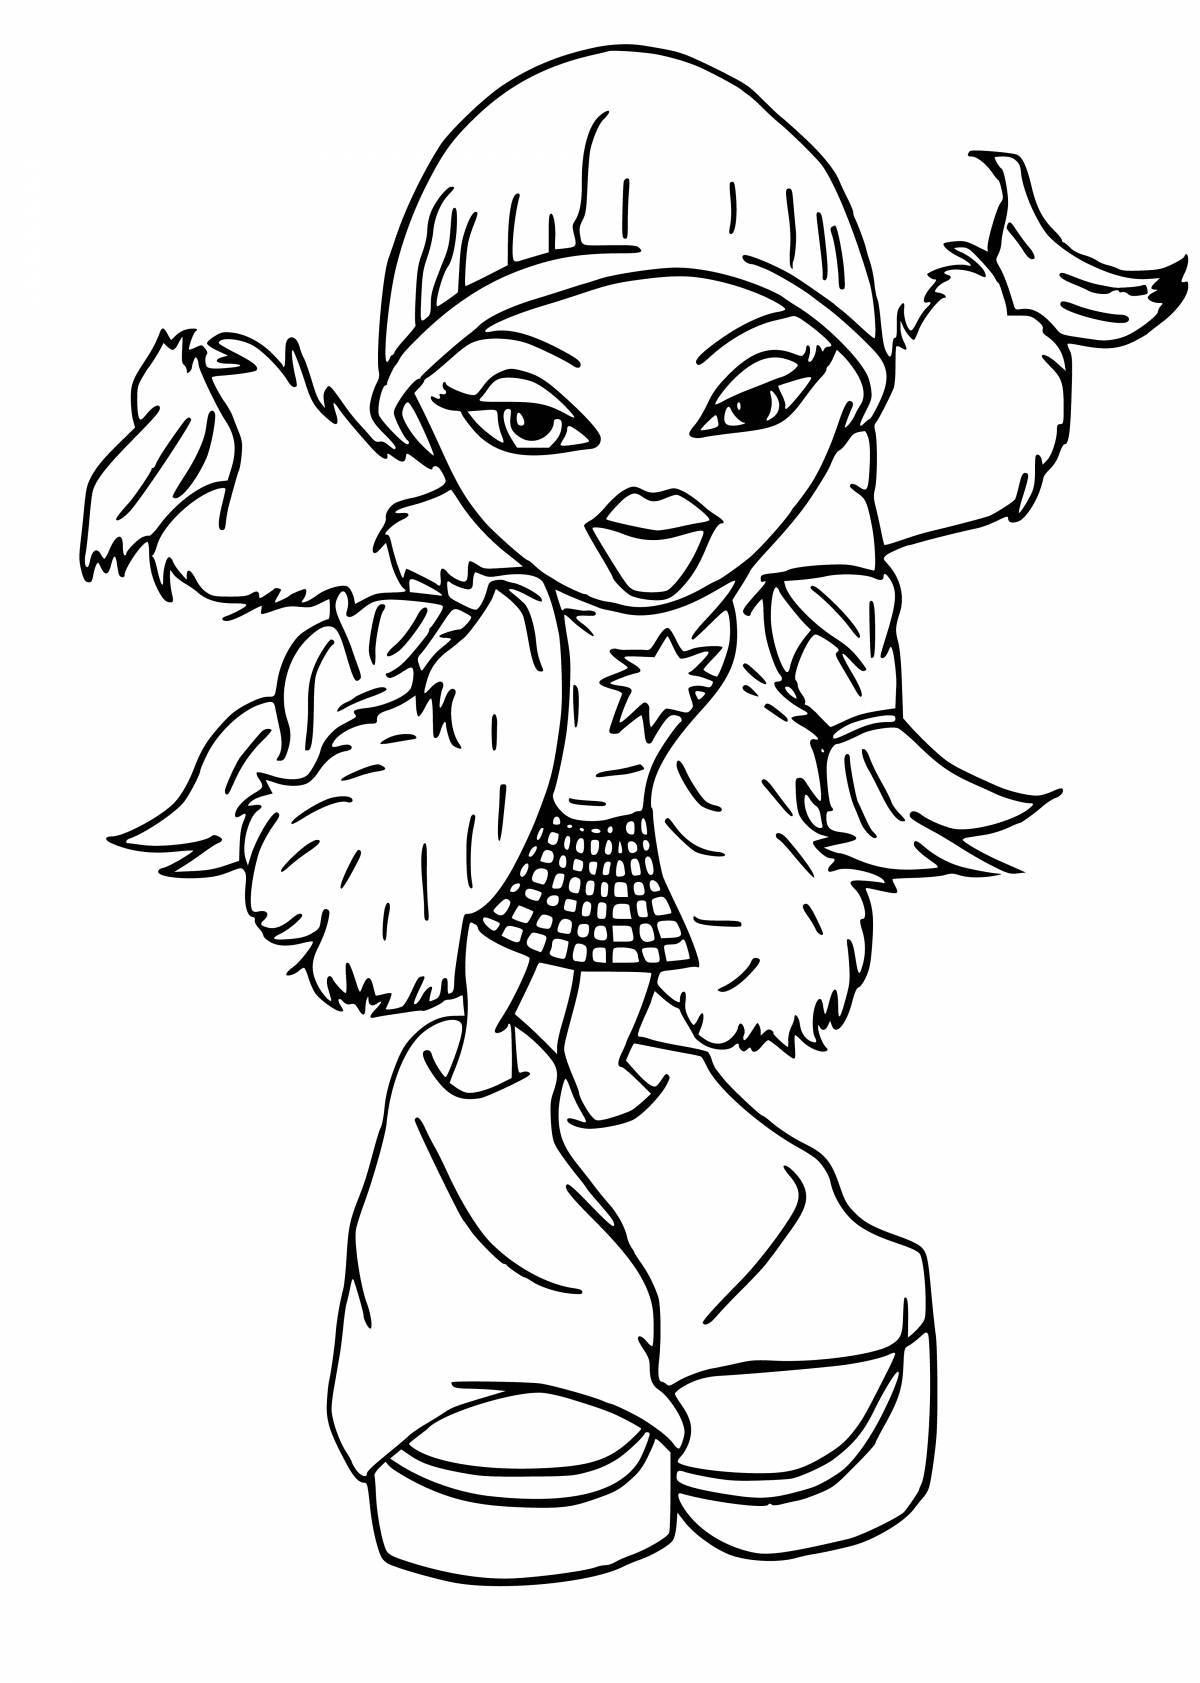 Coloring page holiday poppy